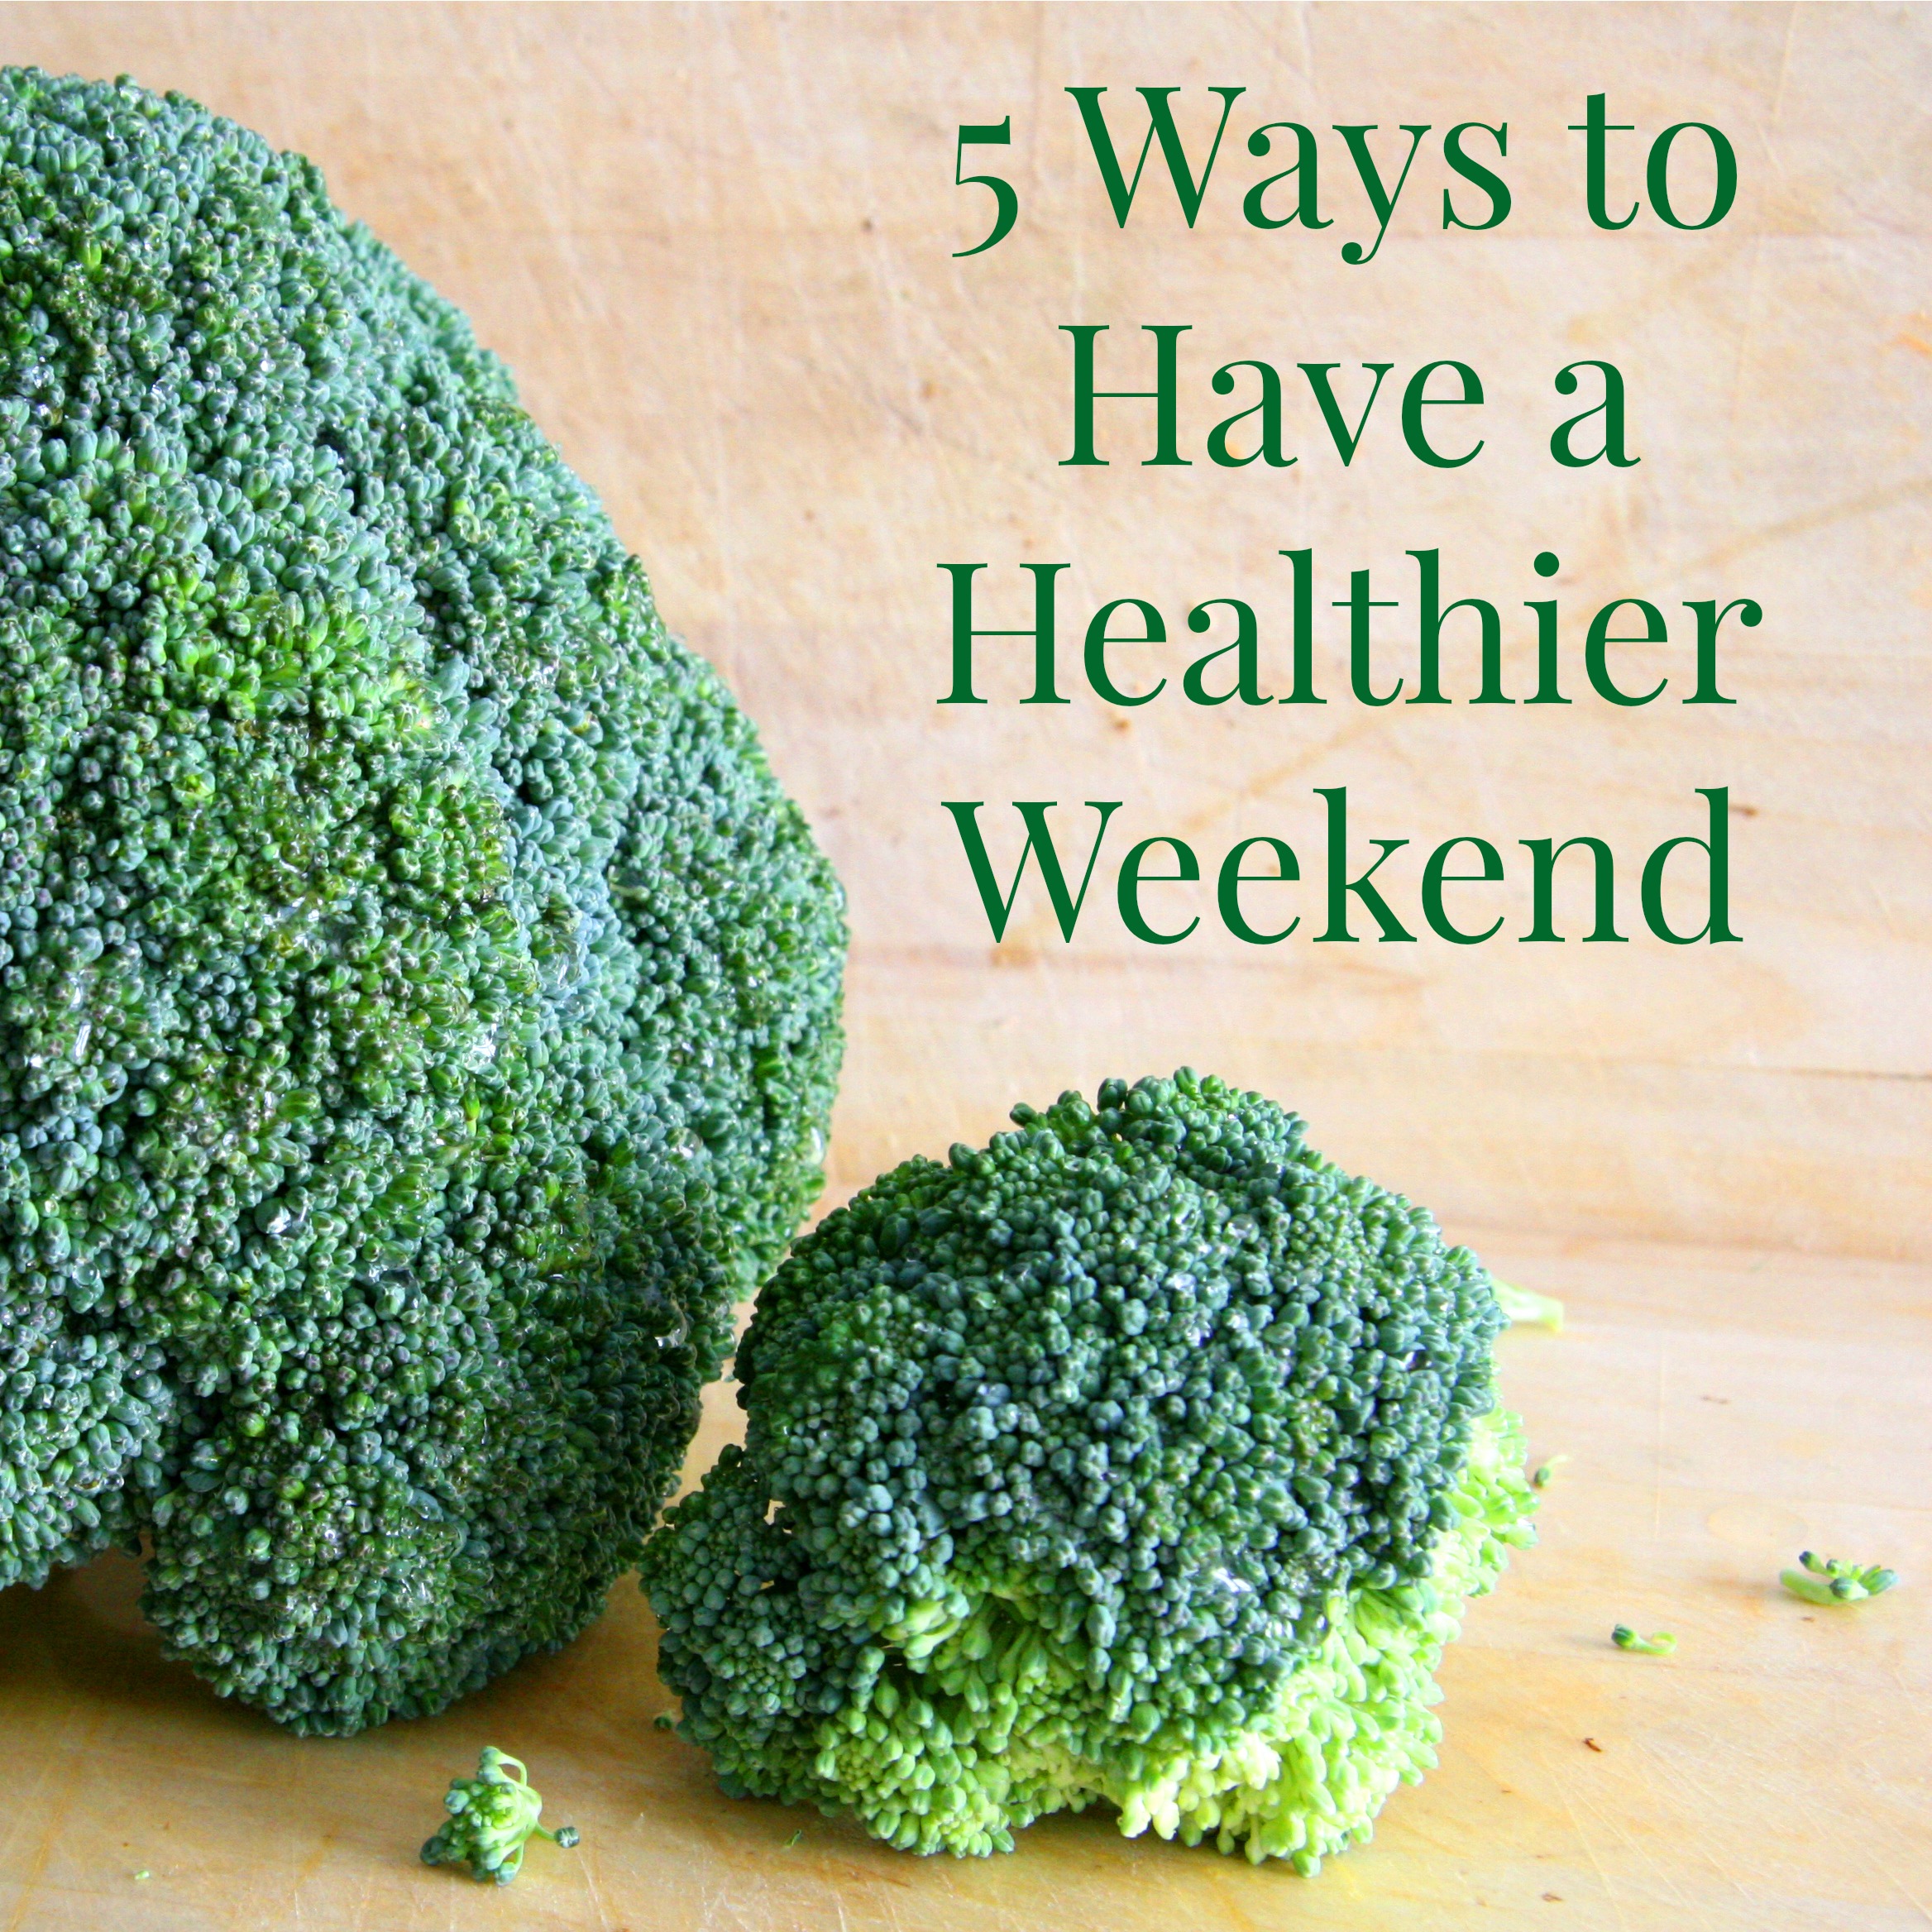 5 Ways to Have a Healthier Weekend